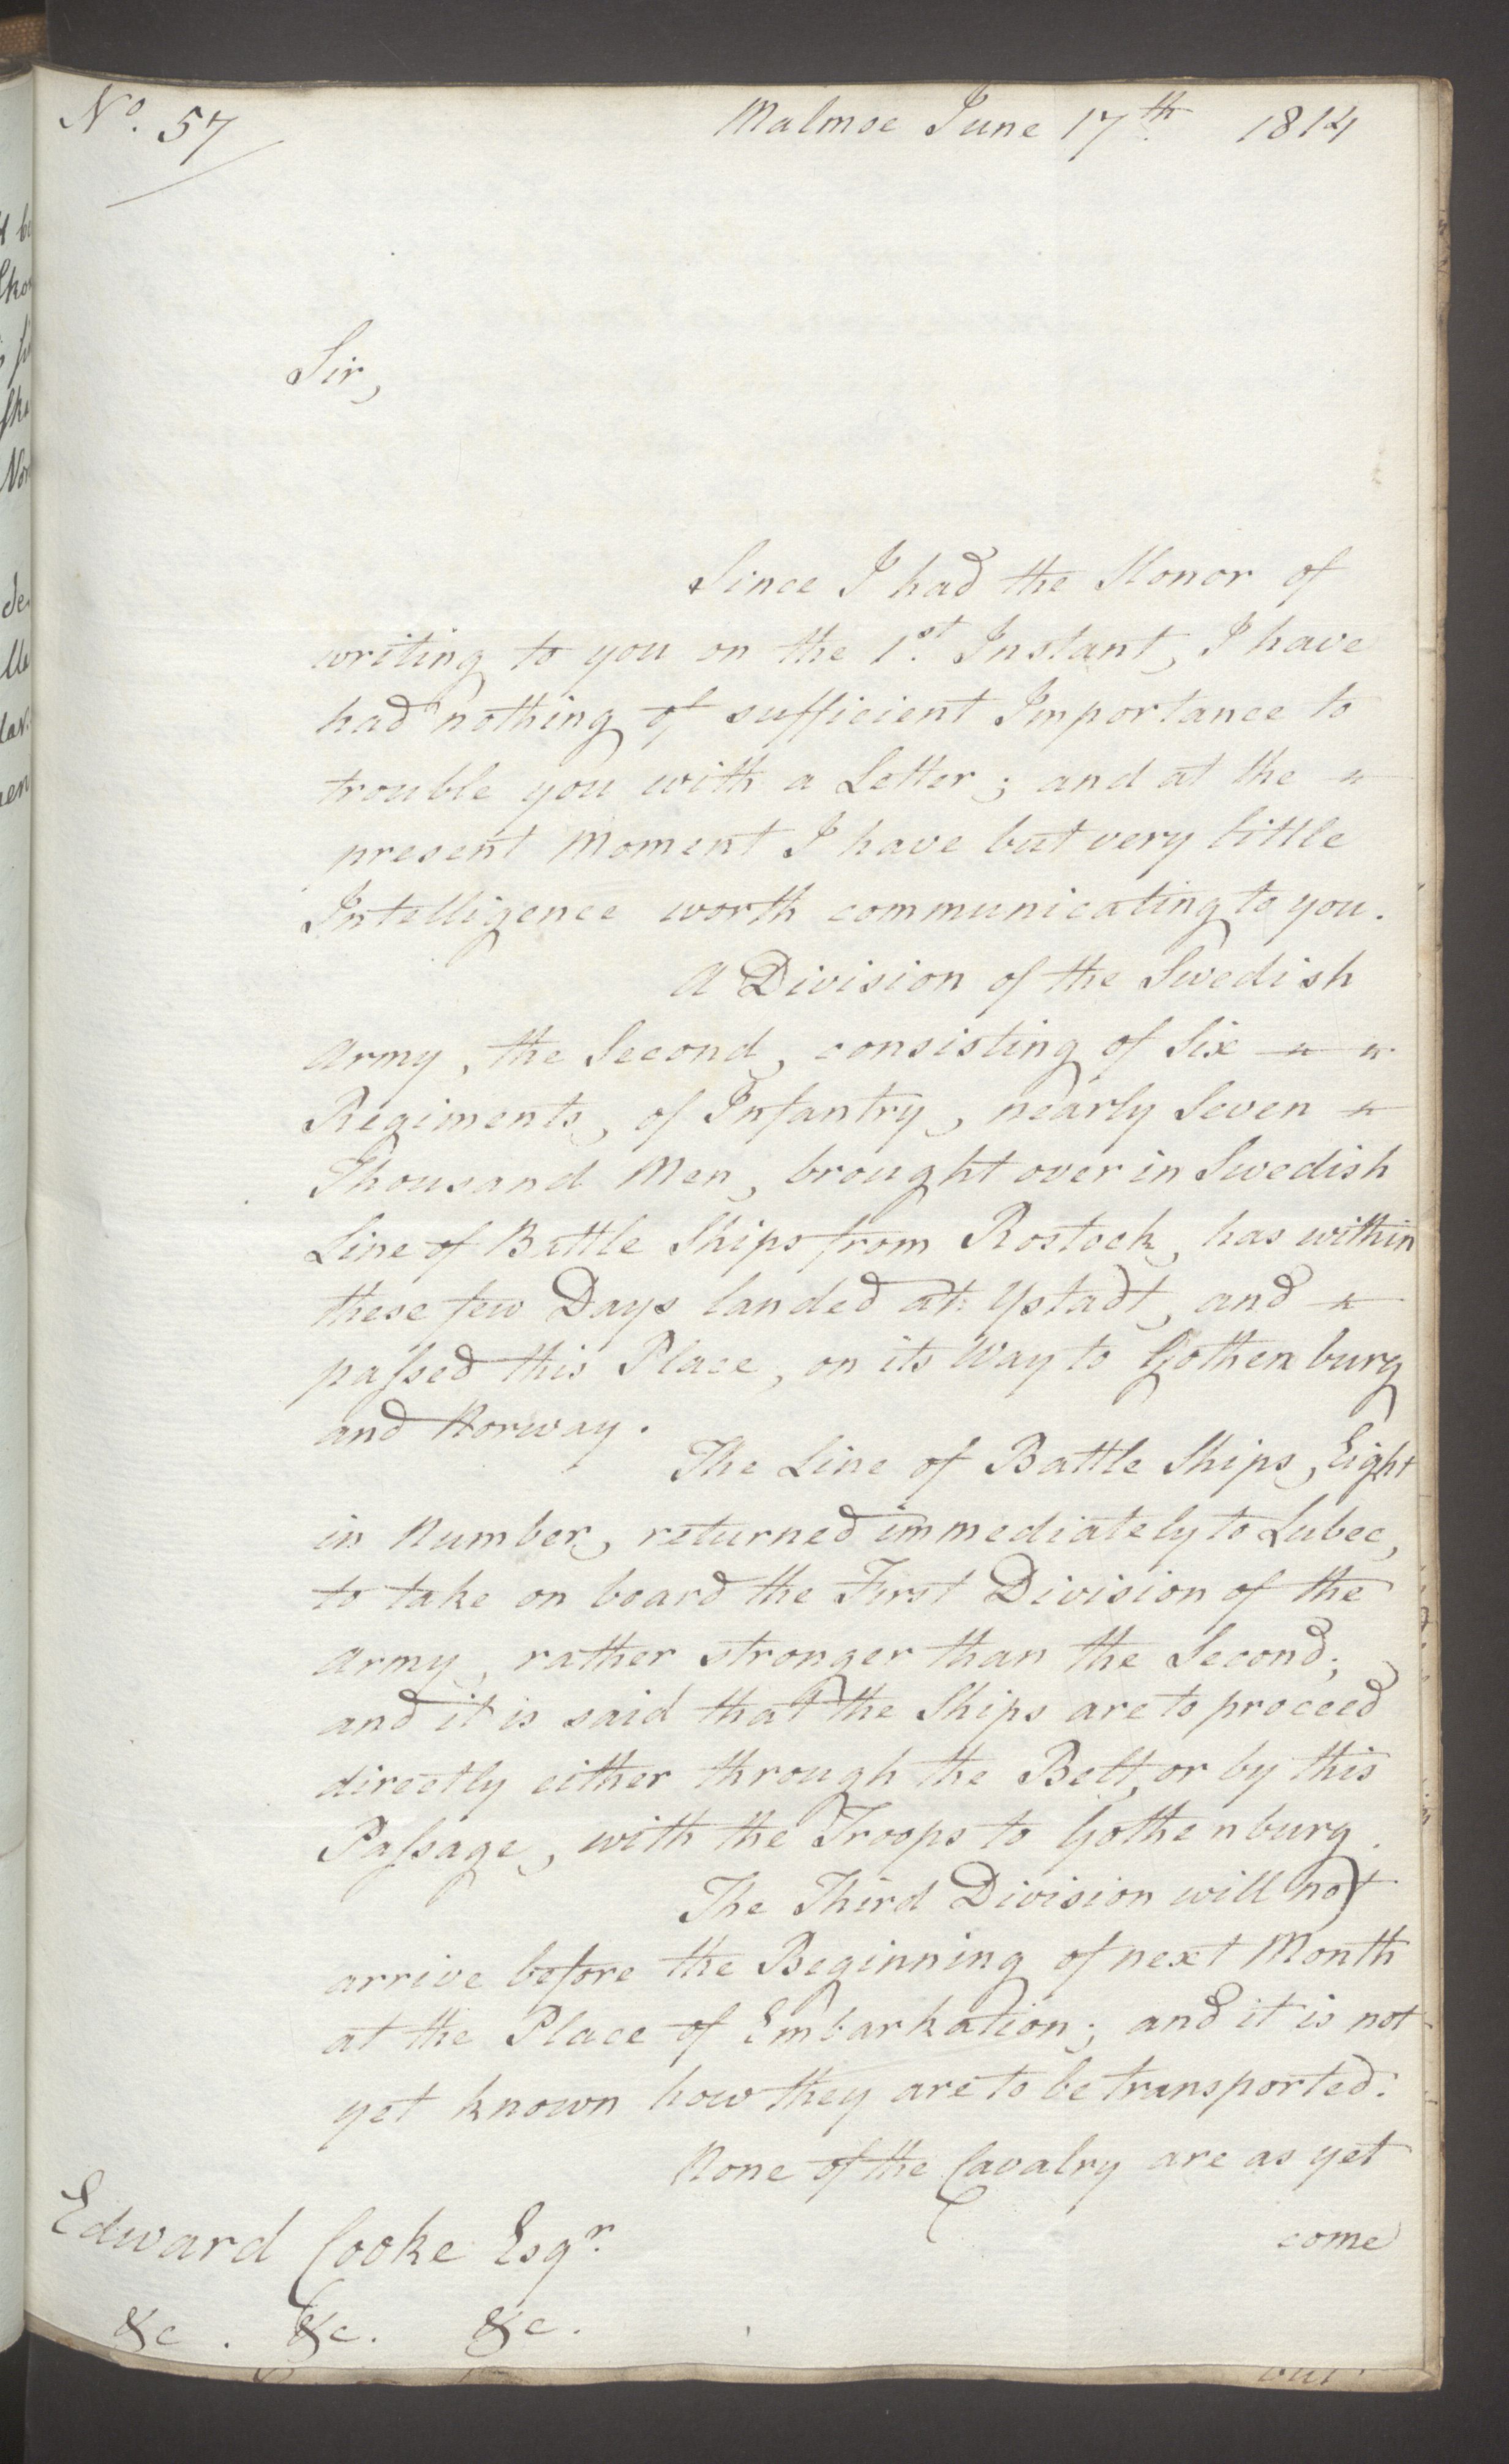 Foreign Office*, UKA/-/FO 38/16: Sir C. Gordon. Reports from Malmö, Jonkoping, and Helsingborg, 1814, p. 63